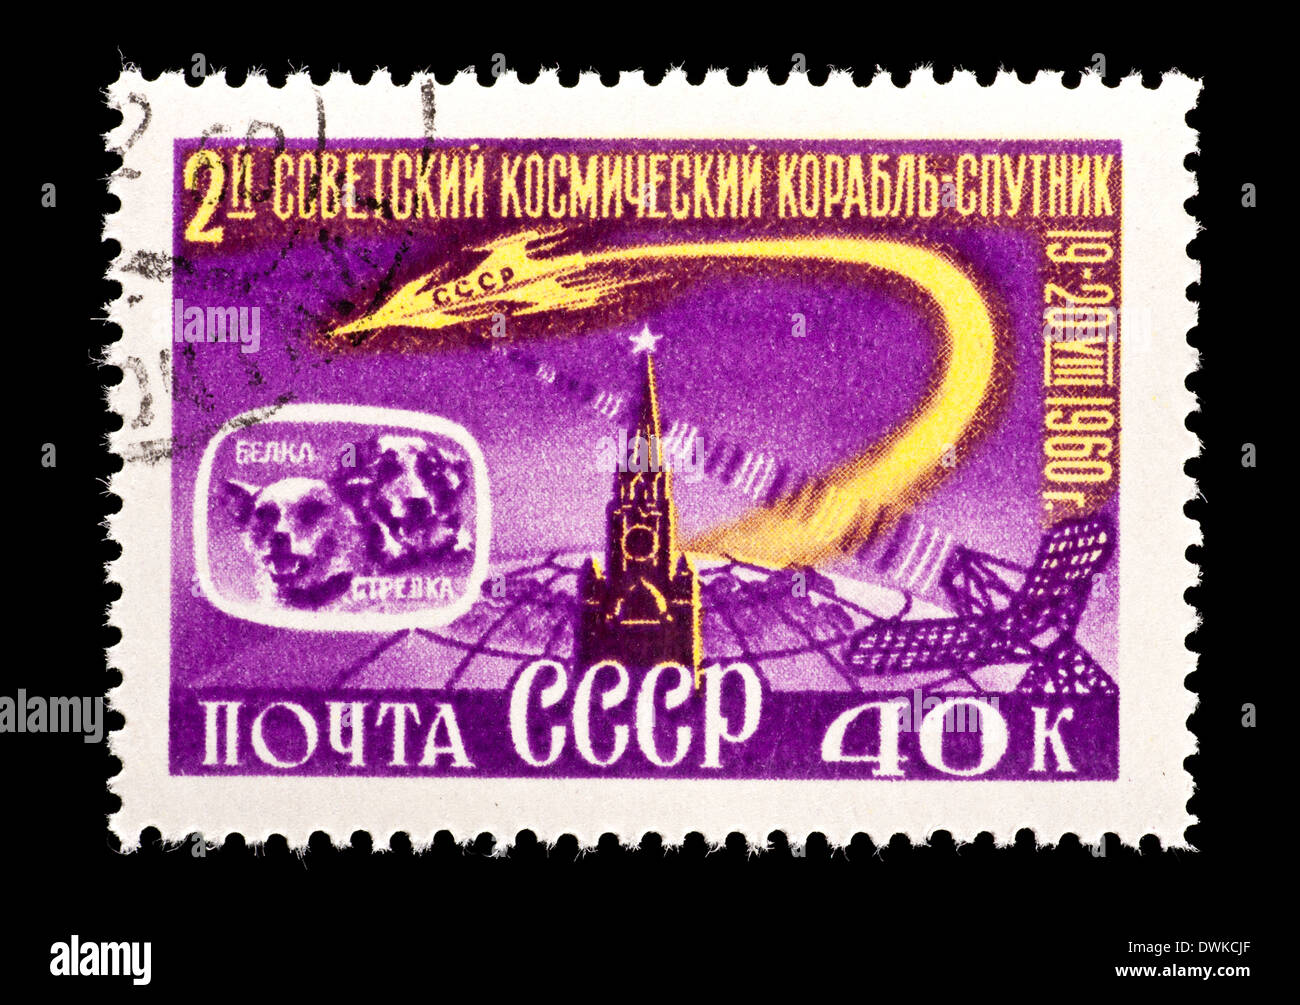 Postage stamp from the Soviet Union (USSR) depicting the Kremlin, Sputnik 5 and the dogs Belka and Strelka. Stock Photo